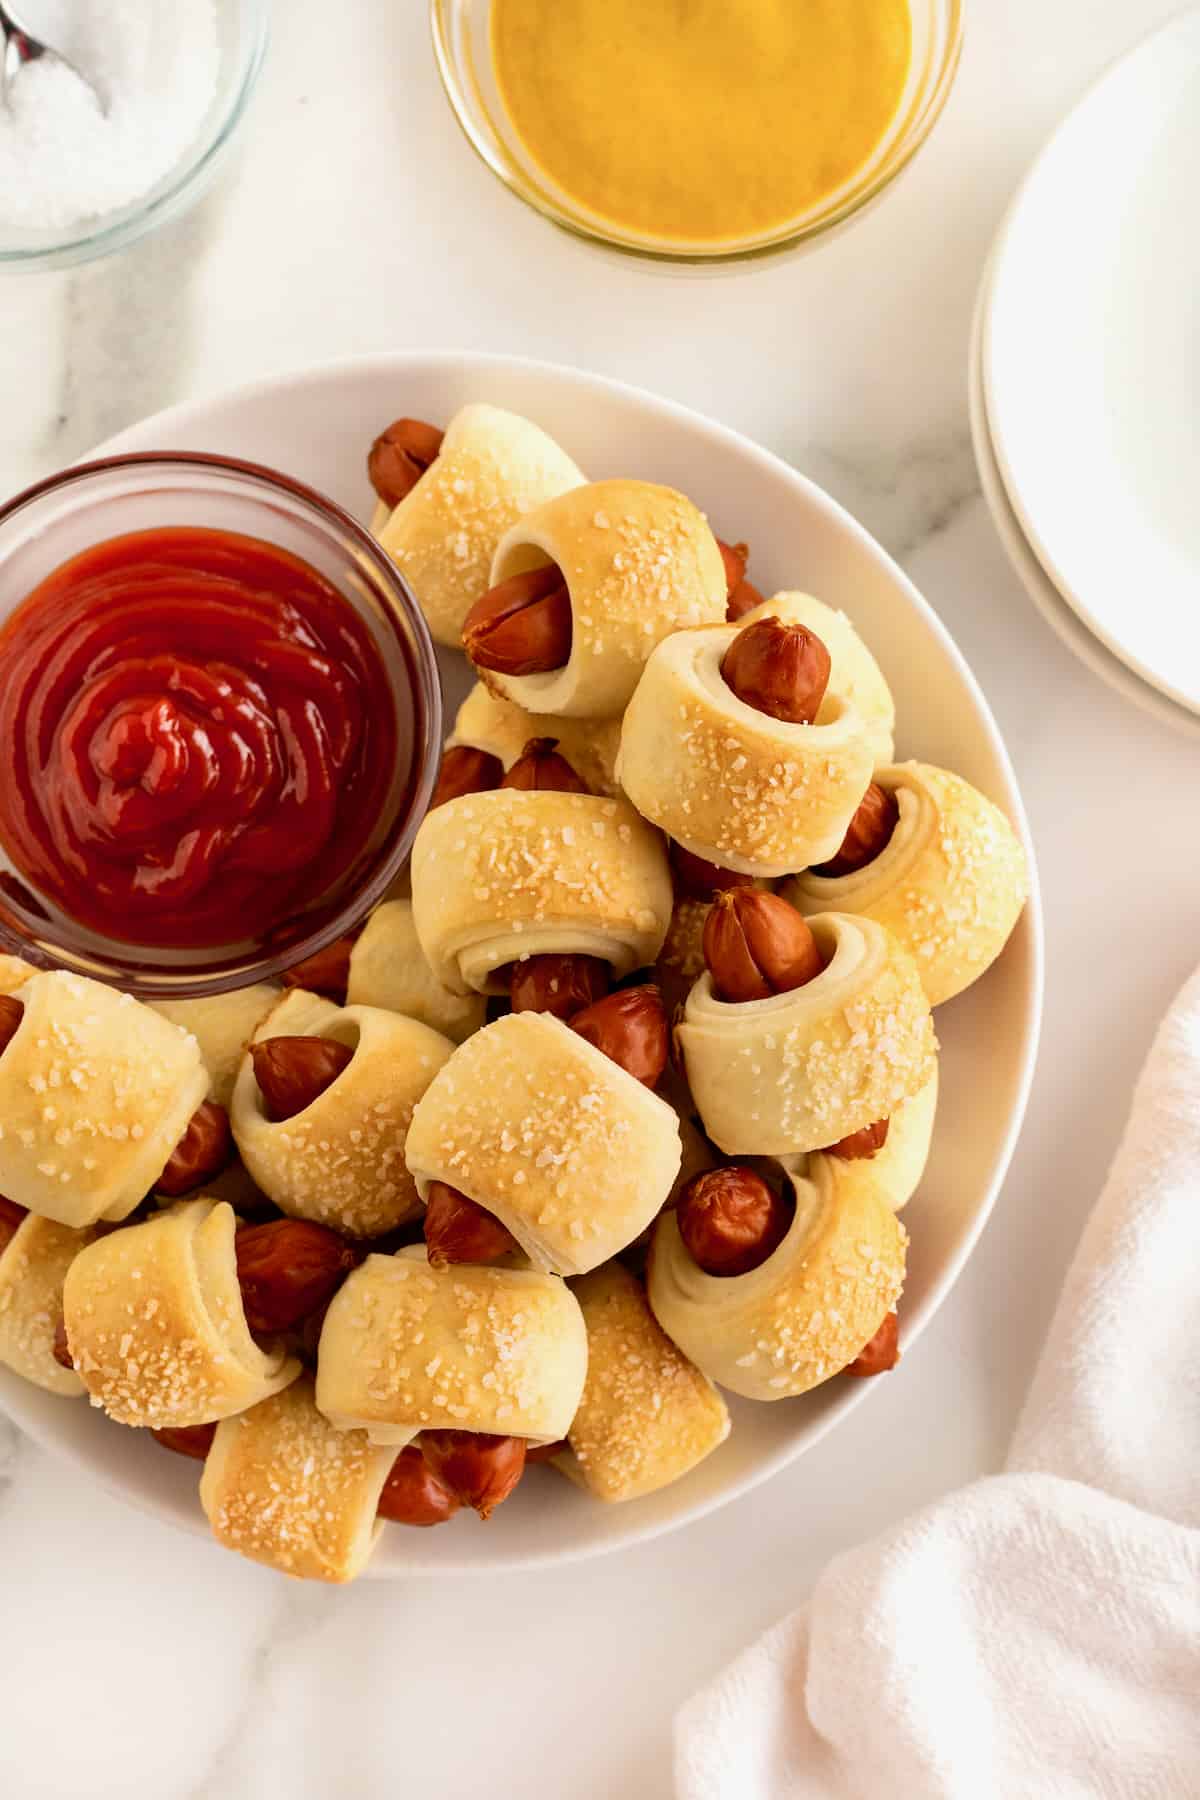 A large white serving plate filled with pigs in a blanket surrounding a small glass dish of ketchup.